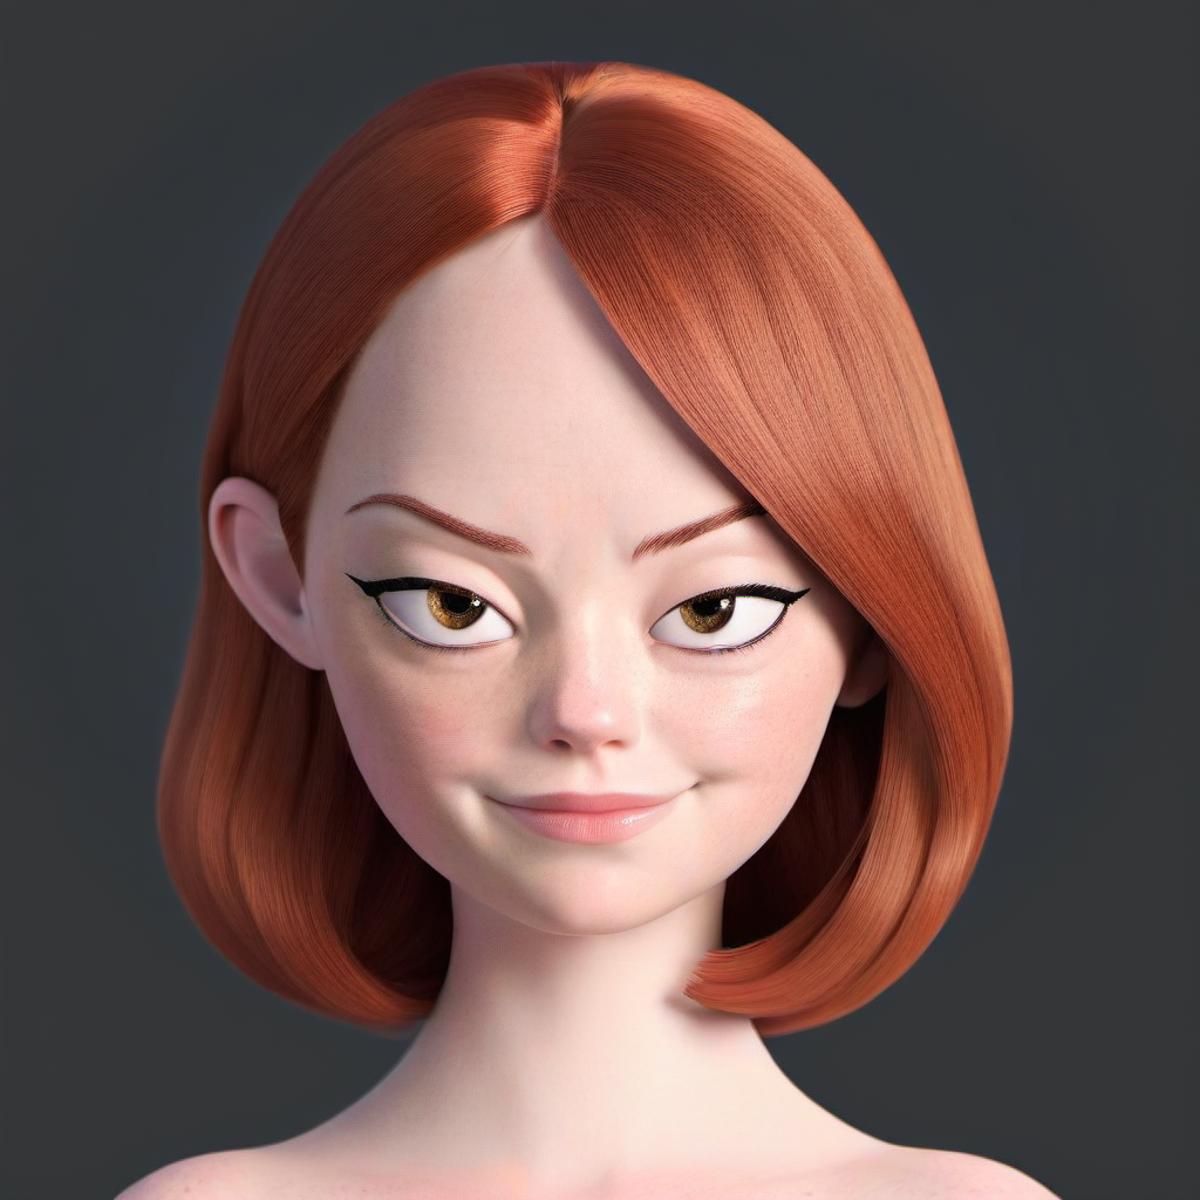 AI model image by Clumsy_Trainer